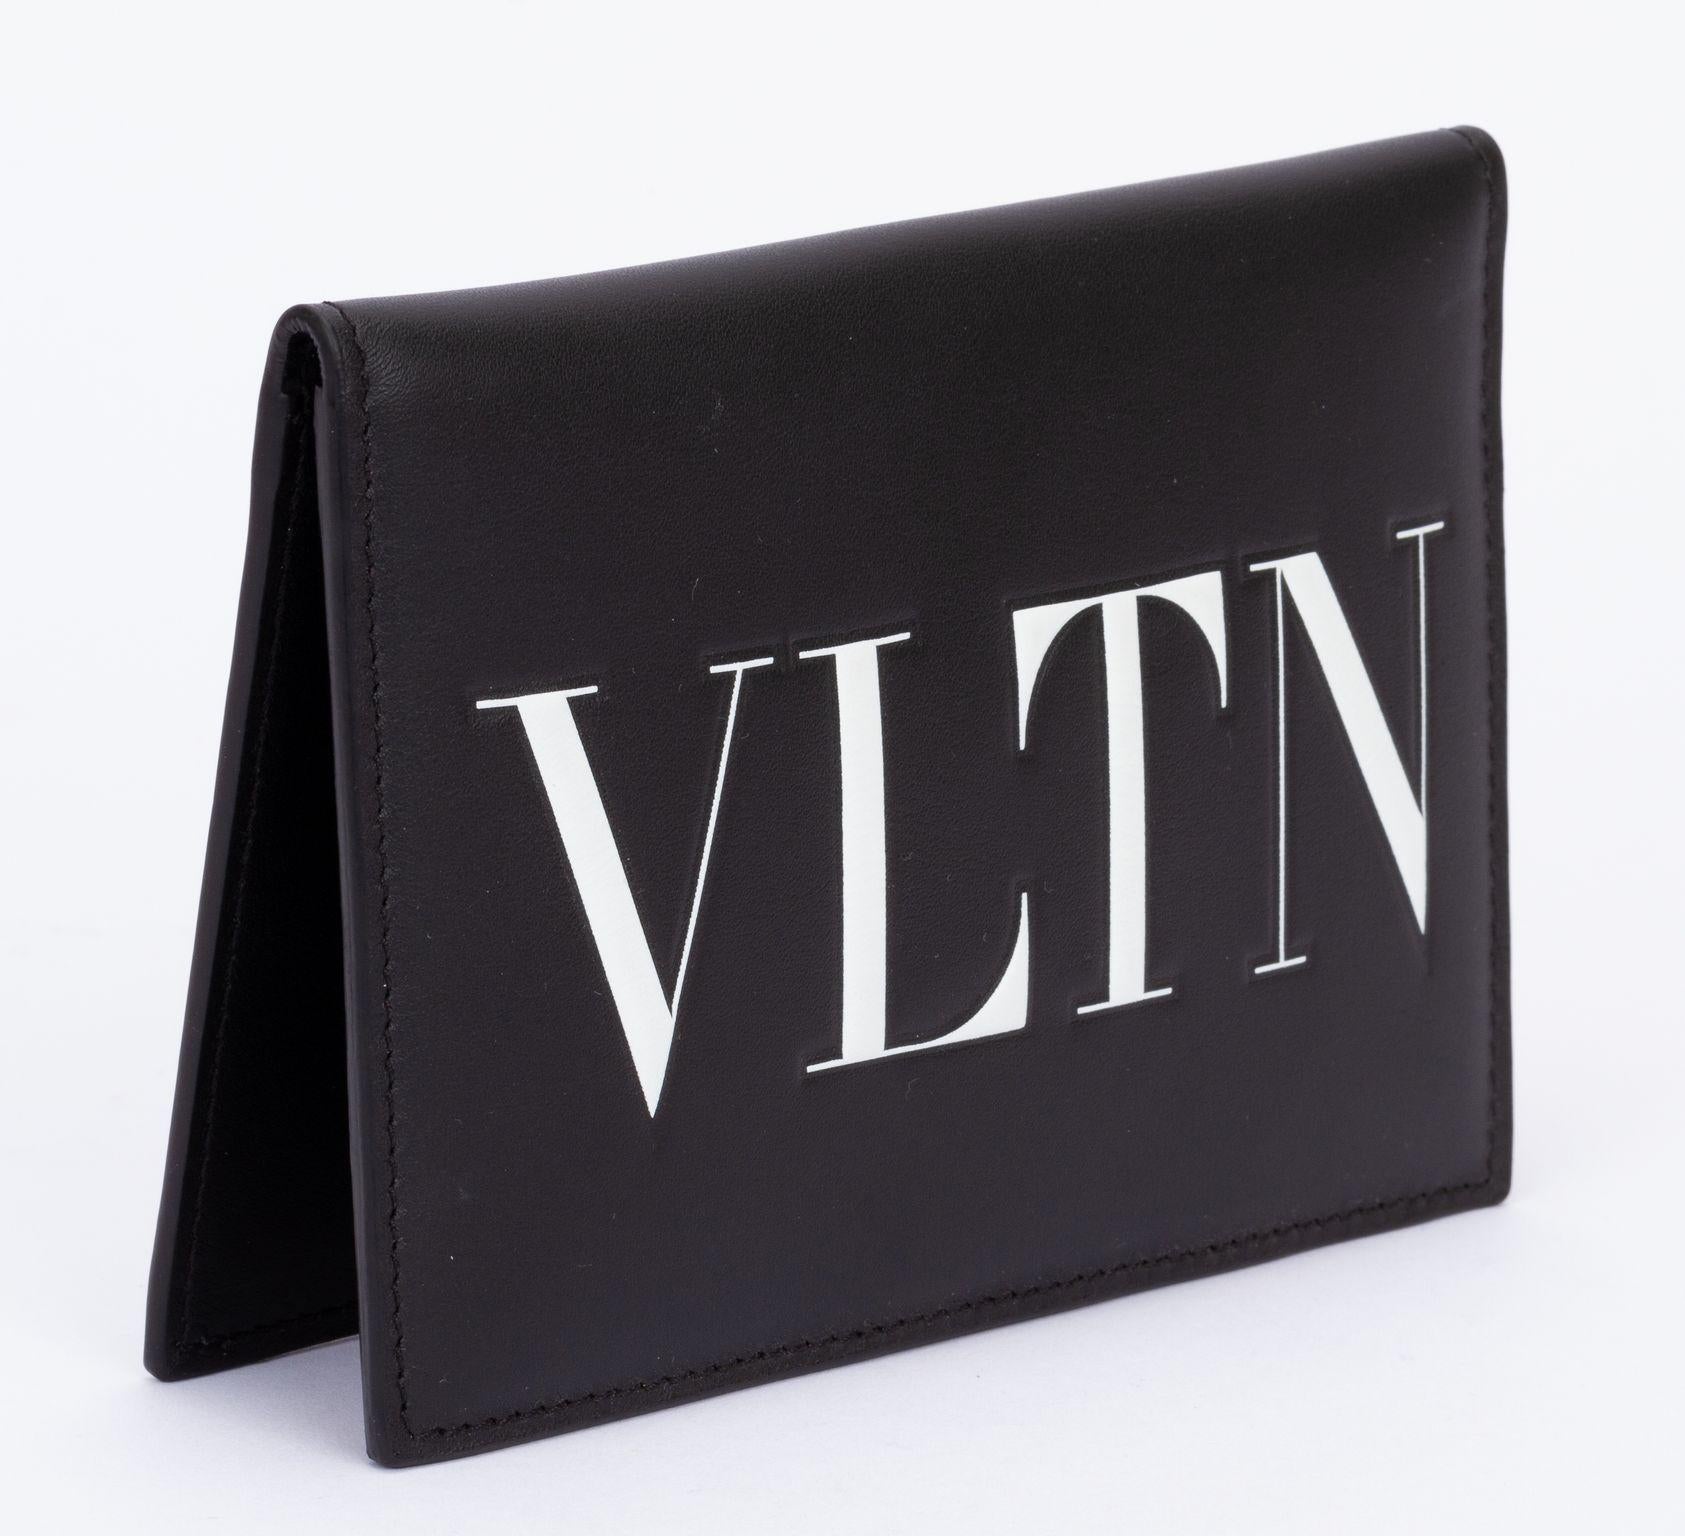 Valentino passport cover with several card holders and a zippered pocket inside. On the outside the Valentino is written on it in white. The piece is brand new and comes with the tag, original box and dust cover.